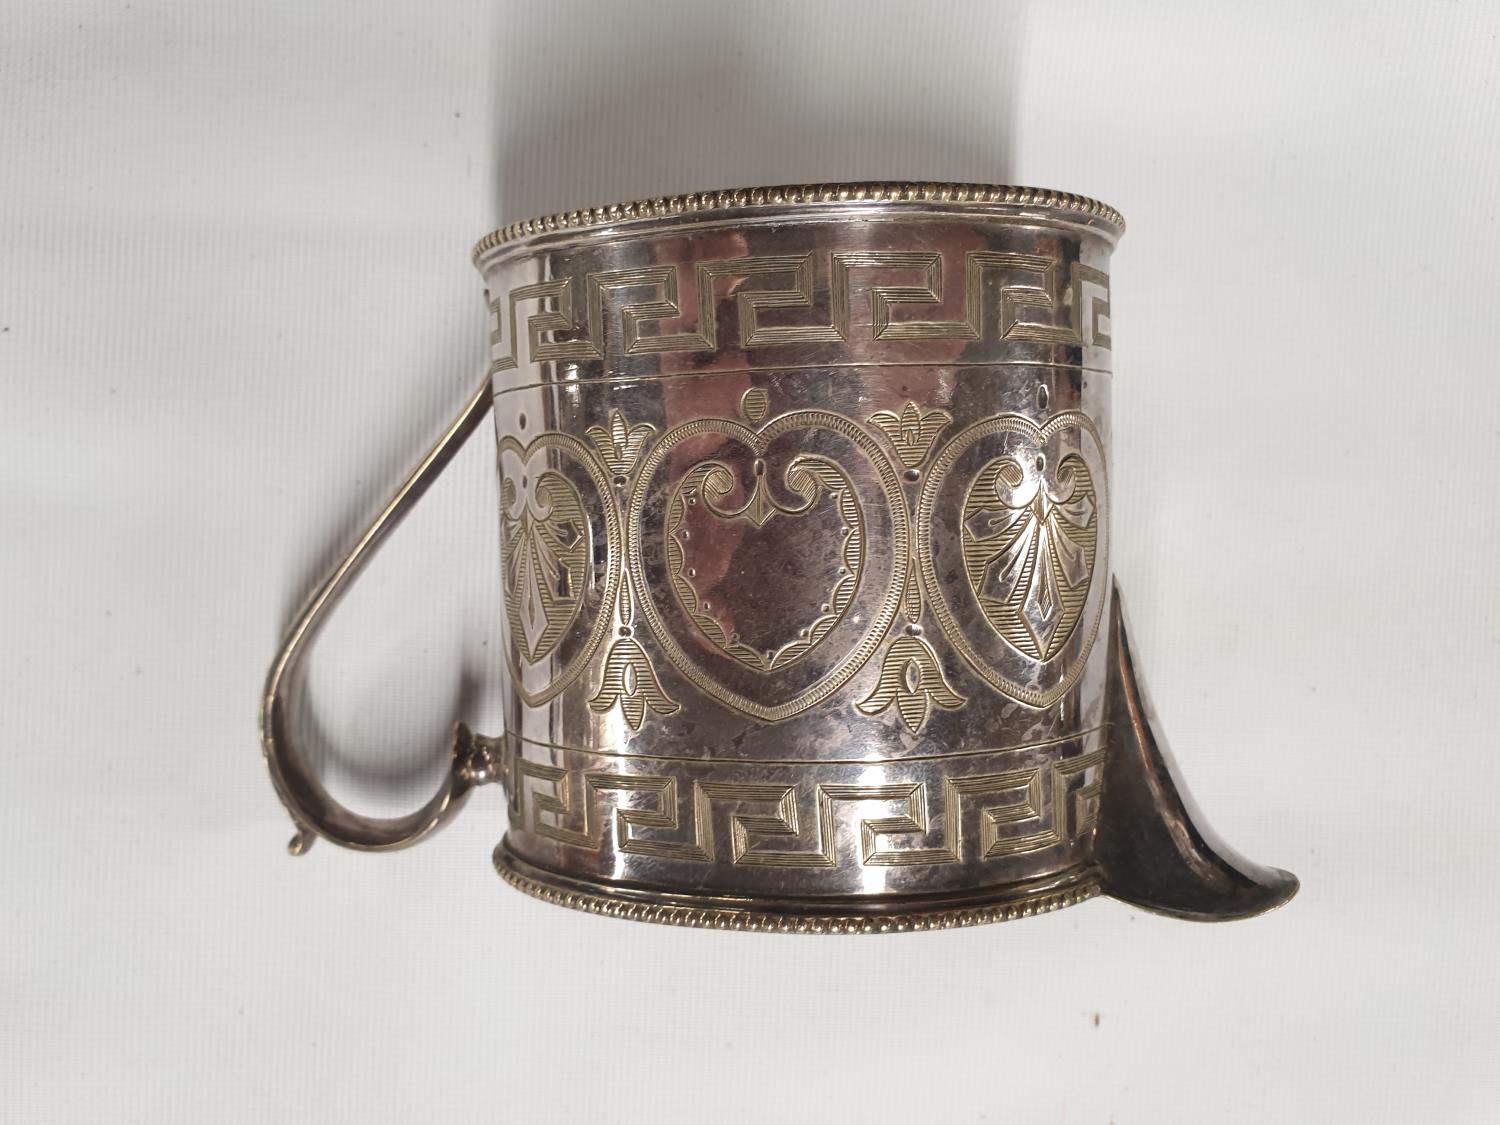 A lovely 19th Century silver plated Tea set with greek key design by Waterhouse Dublin. - Image 5 of 5